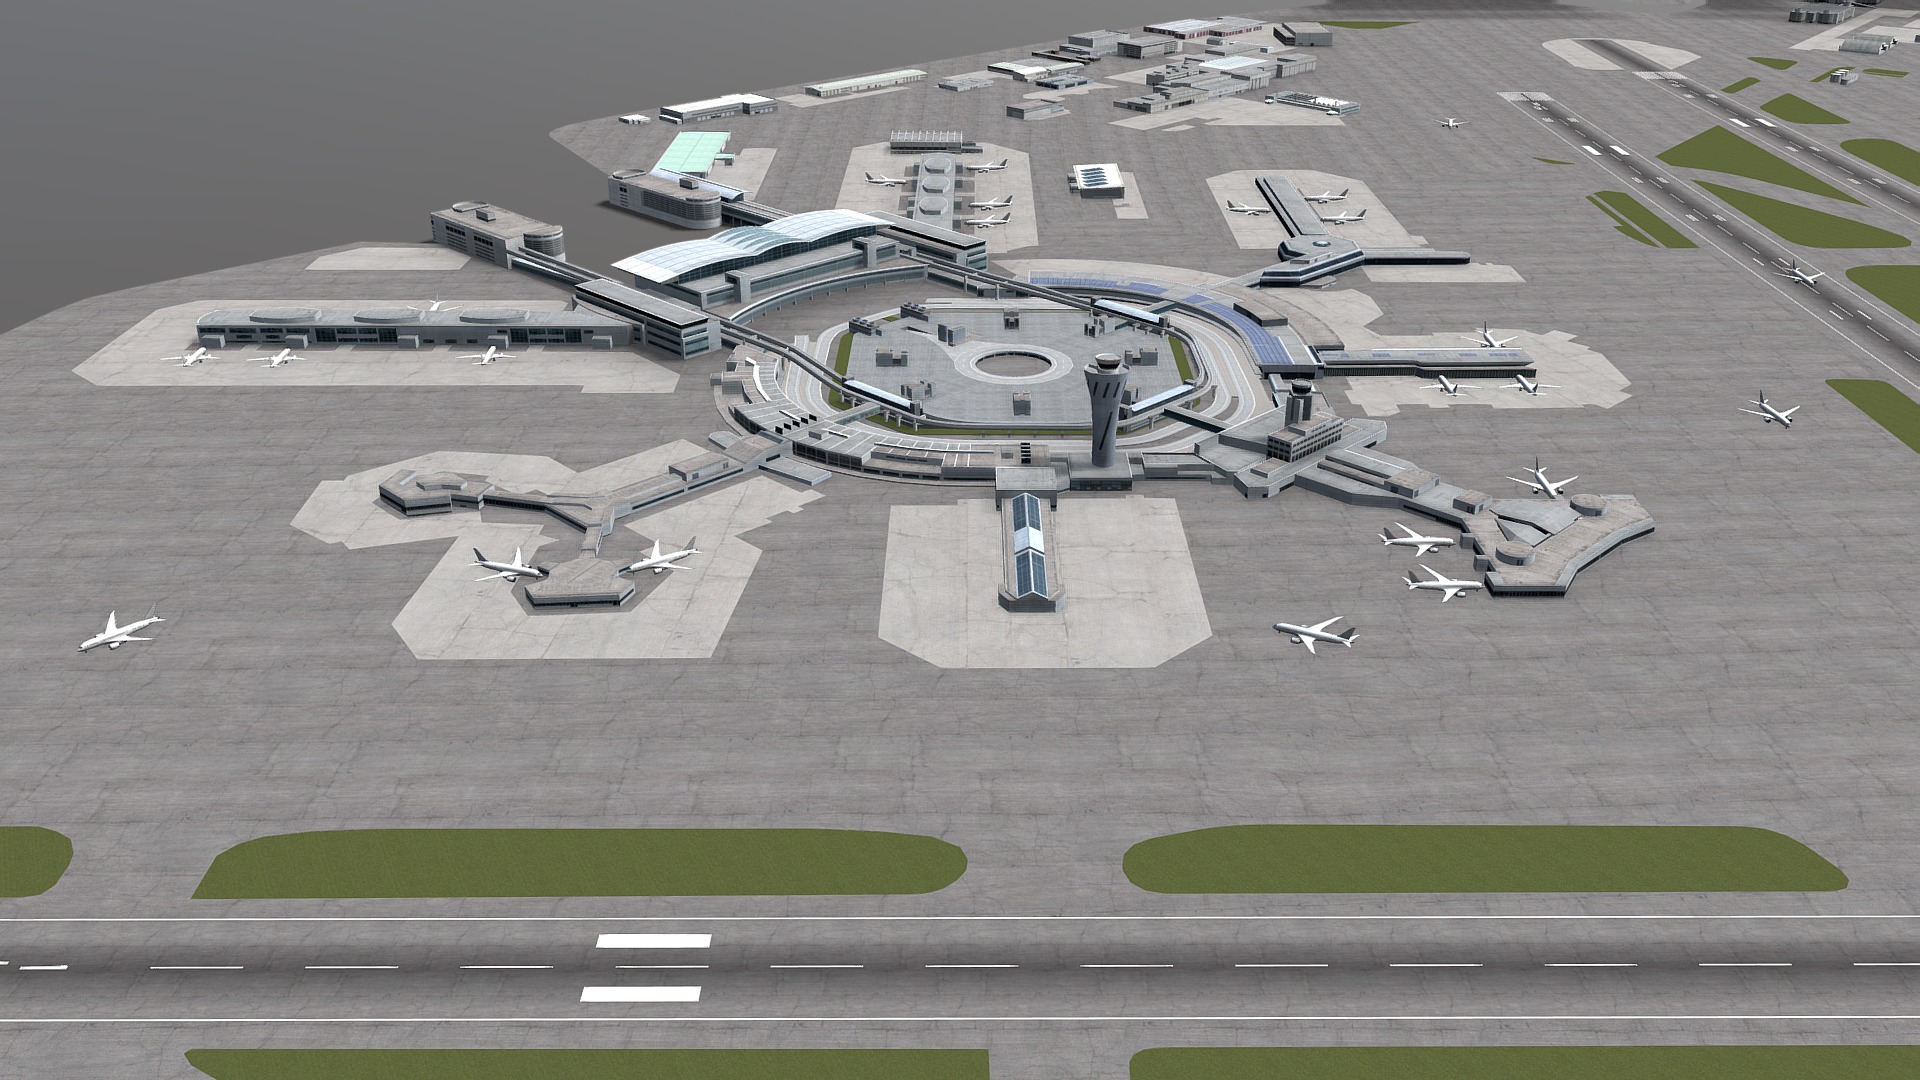 3D model San Francisco International Airport (SFO) - This is a 3D model of the San Francisco International Airport (SFO). The 3D model is about a group of airplanes on a runway.